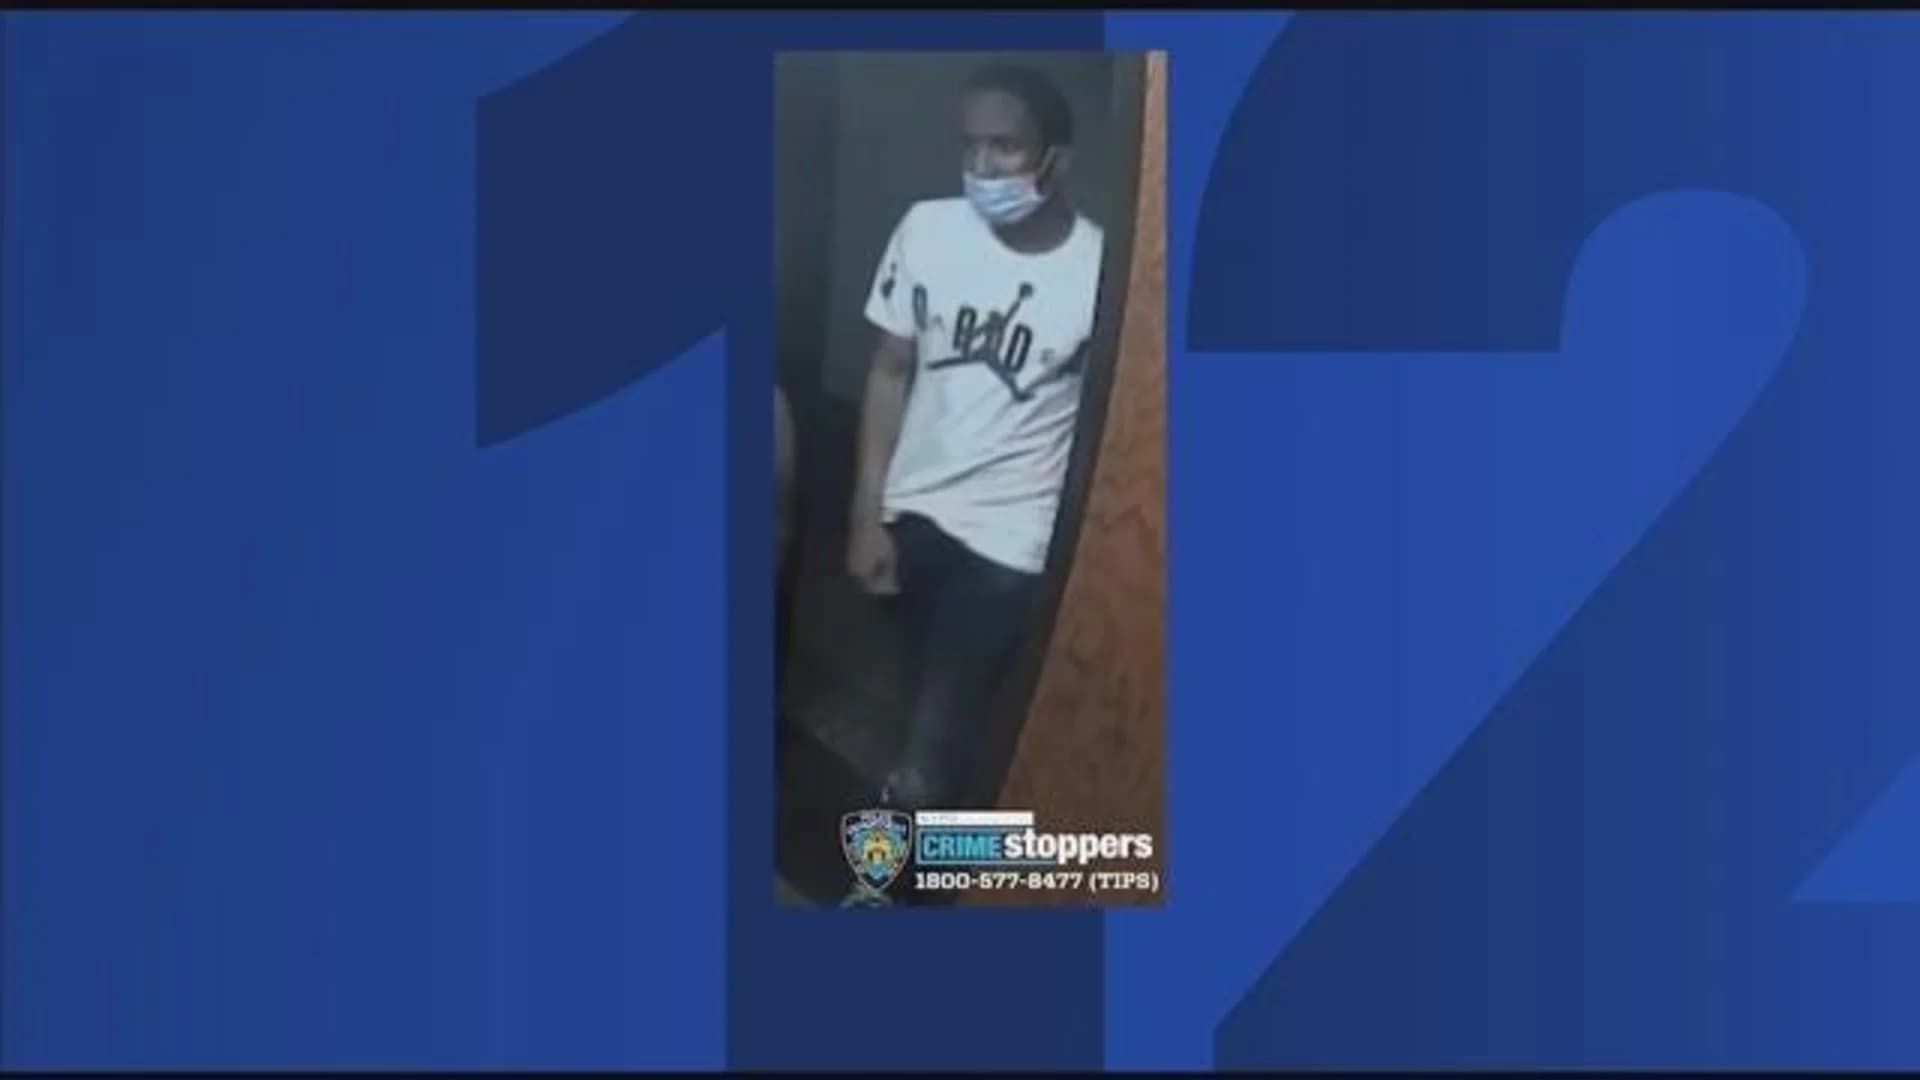 Police release image of suspect wanted for deadly stabbing of transgender woman in Kingsbridge Heights